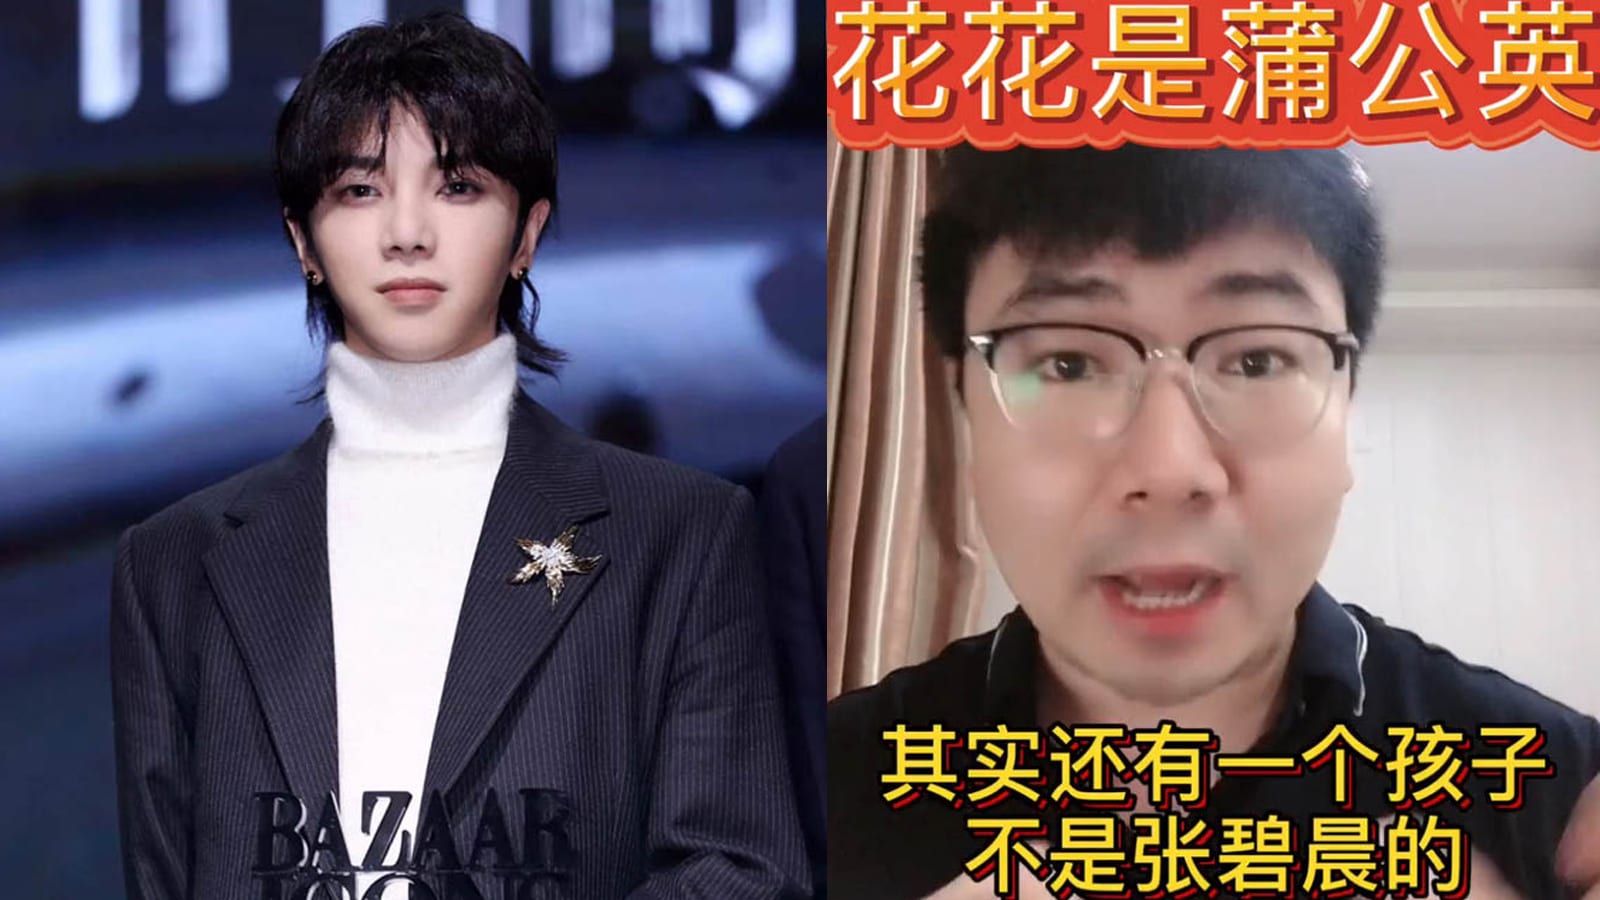 Hua Chenyu Denies Claims That He Has Another Kid And That His Other Baby Mama Is Not Zhang Bichen